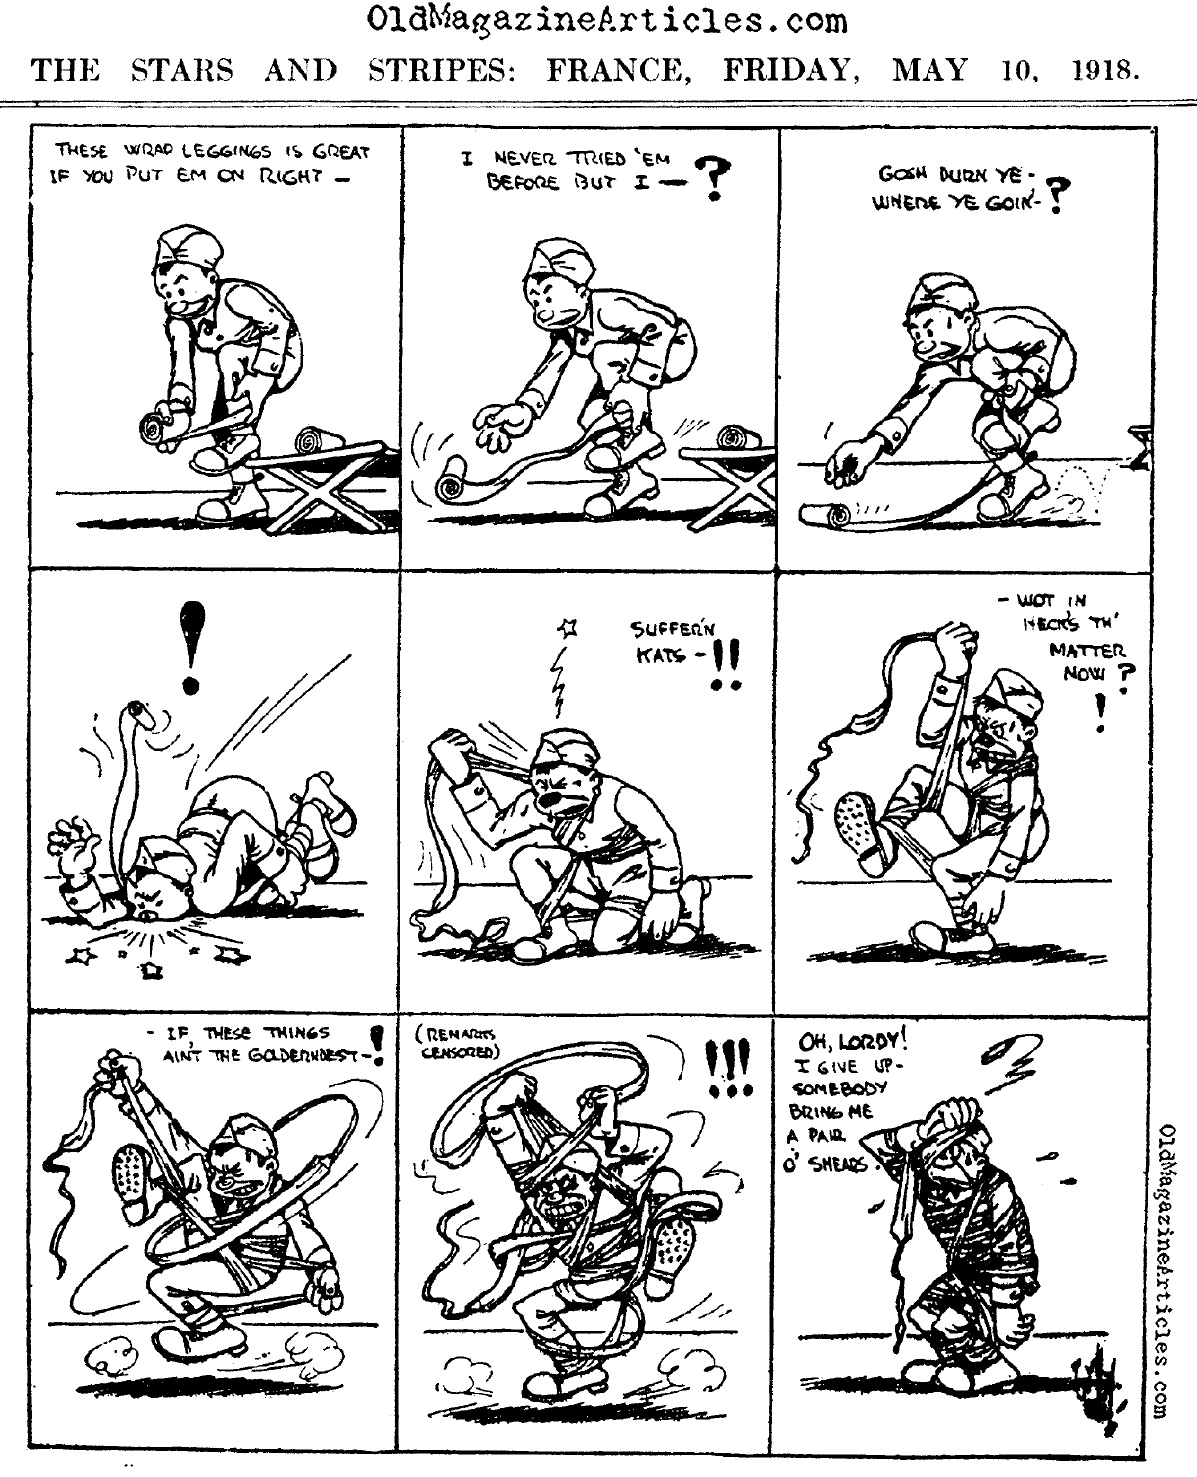 A Puttee Cartoon (The Stars and Stripes, 1918)